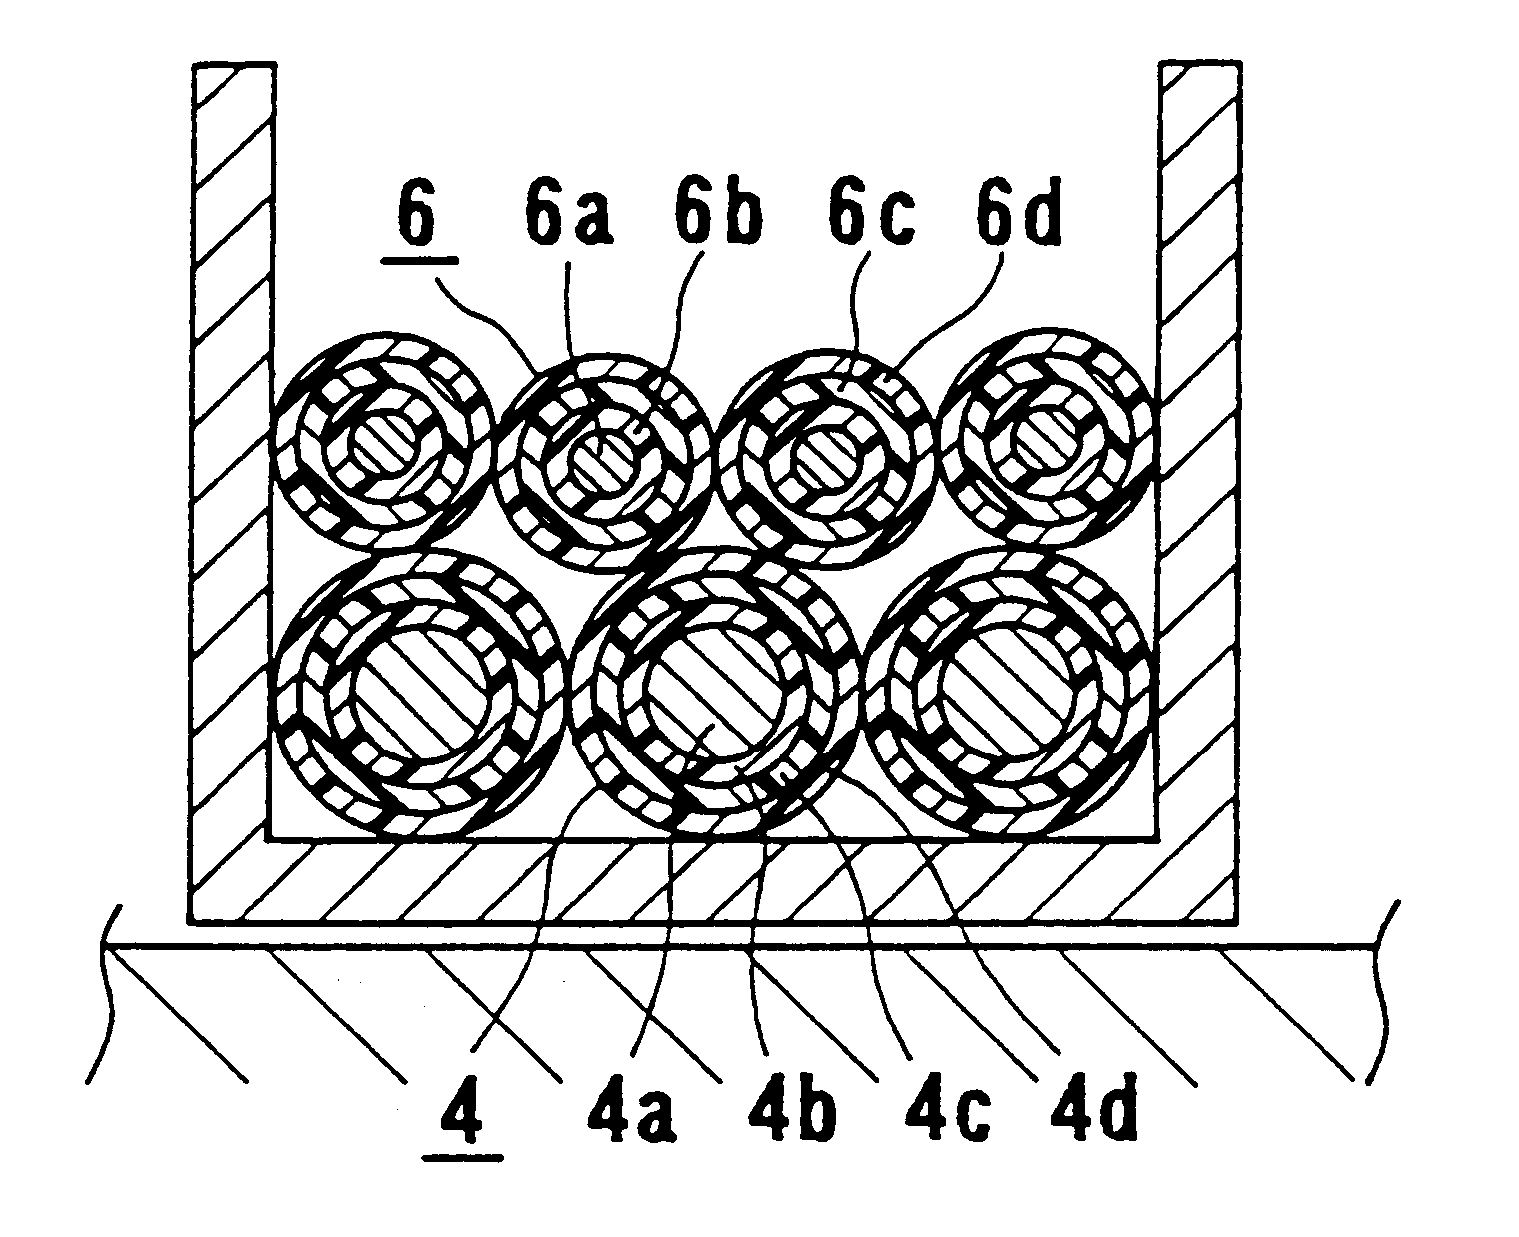 Multilayer insulated wire and transformers using the same